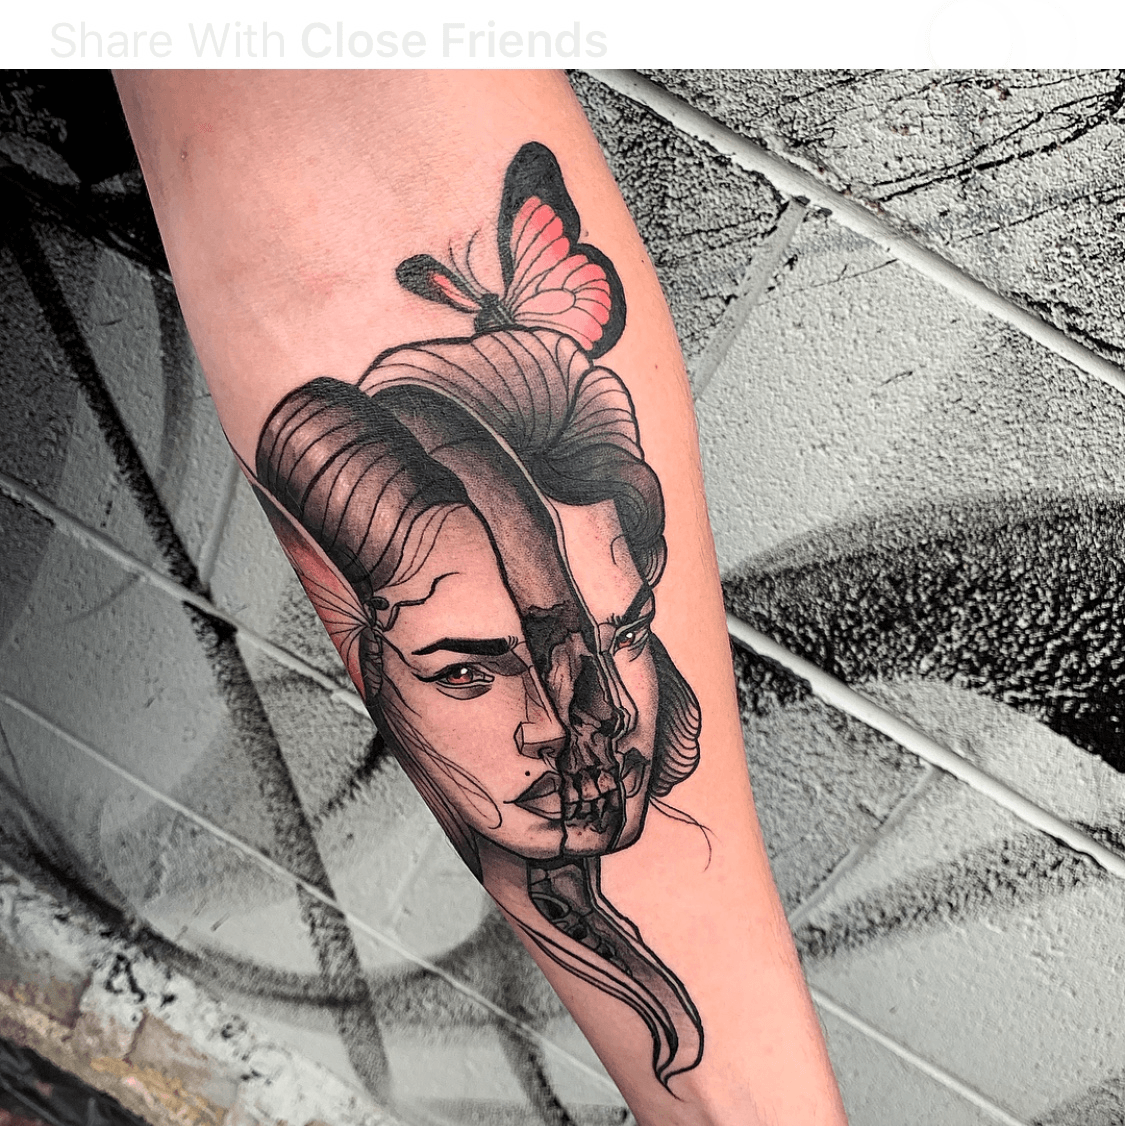 Tattoo uploaded by Lolita Borges Cunha  Surreal word tattoo and split face   Tattoodo